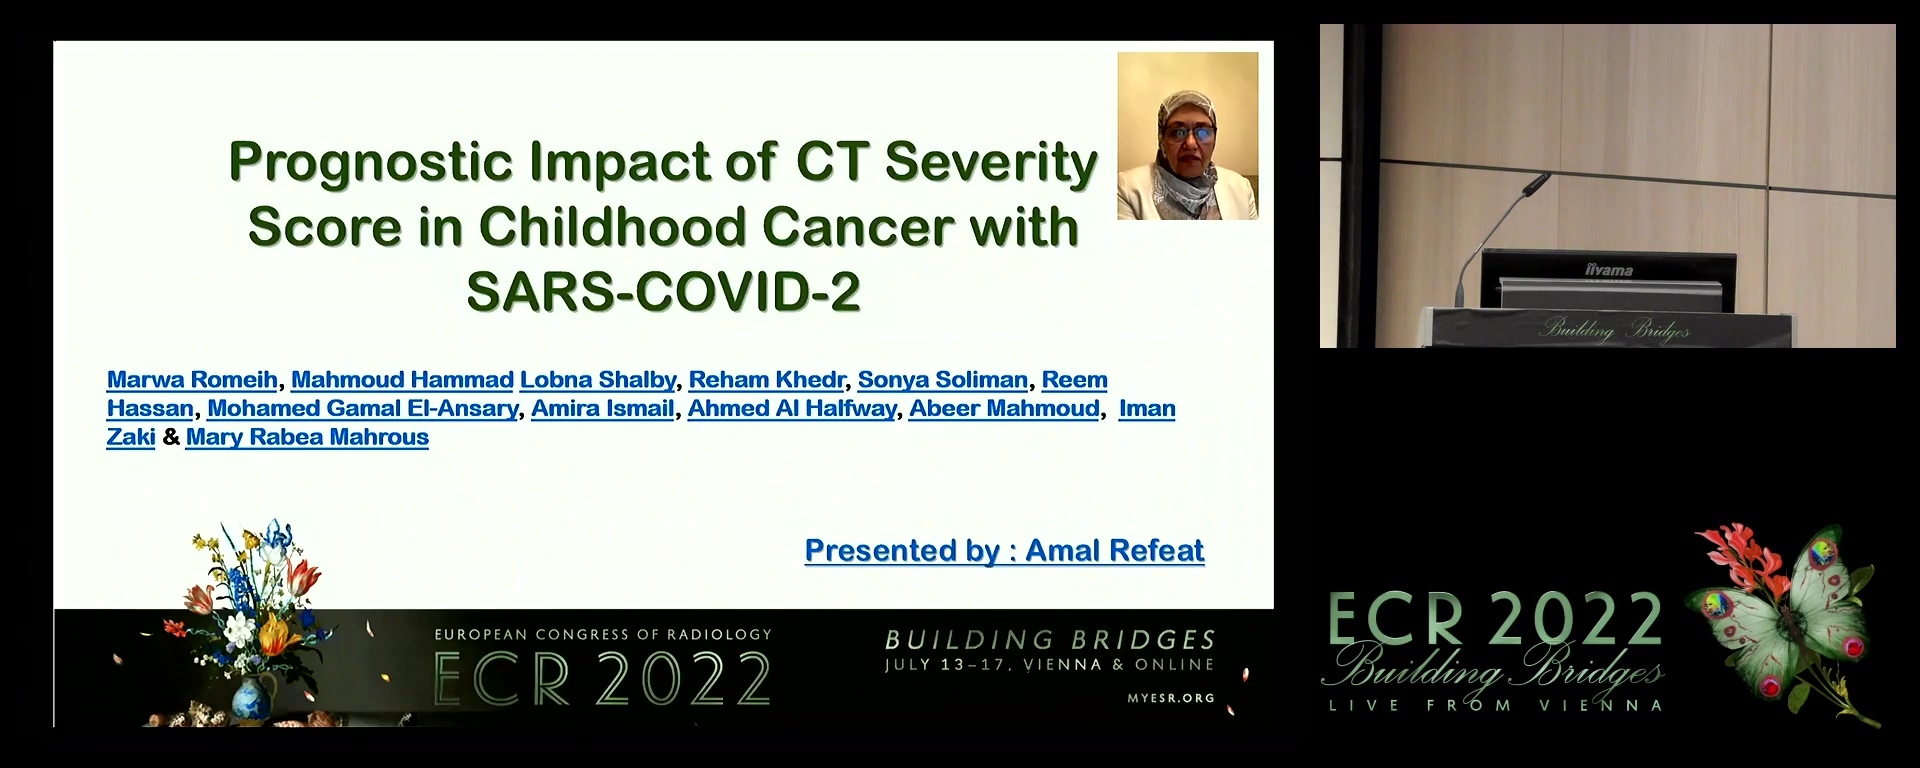 Prognostic impact of CT severity score in childhood cancer with SARS-CoV-2 - Amal Refaat, Cairo / EG